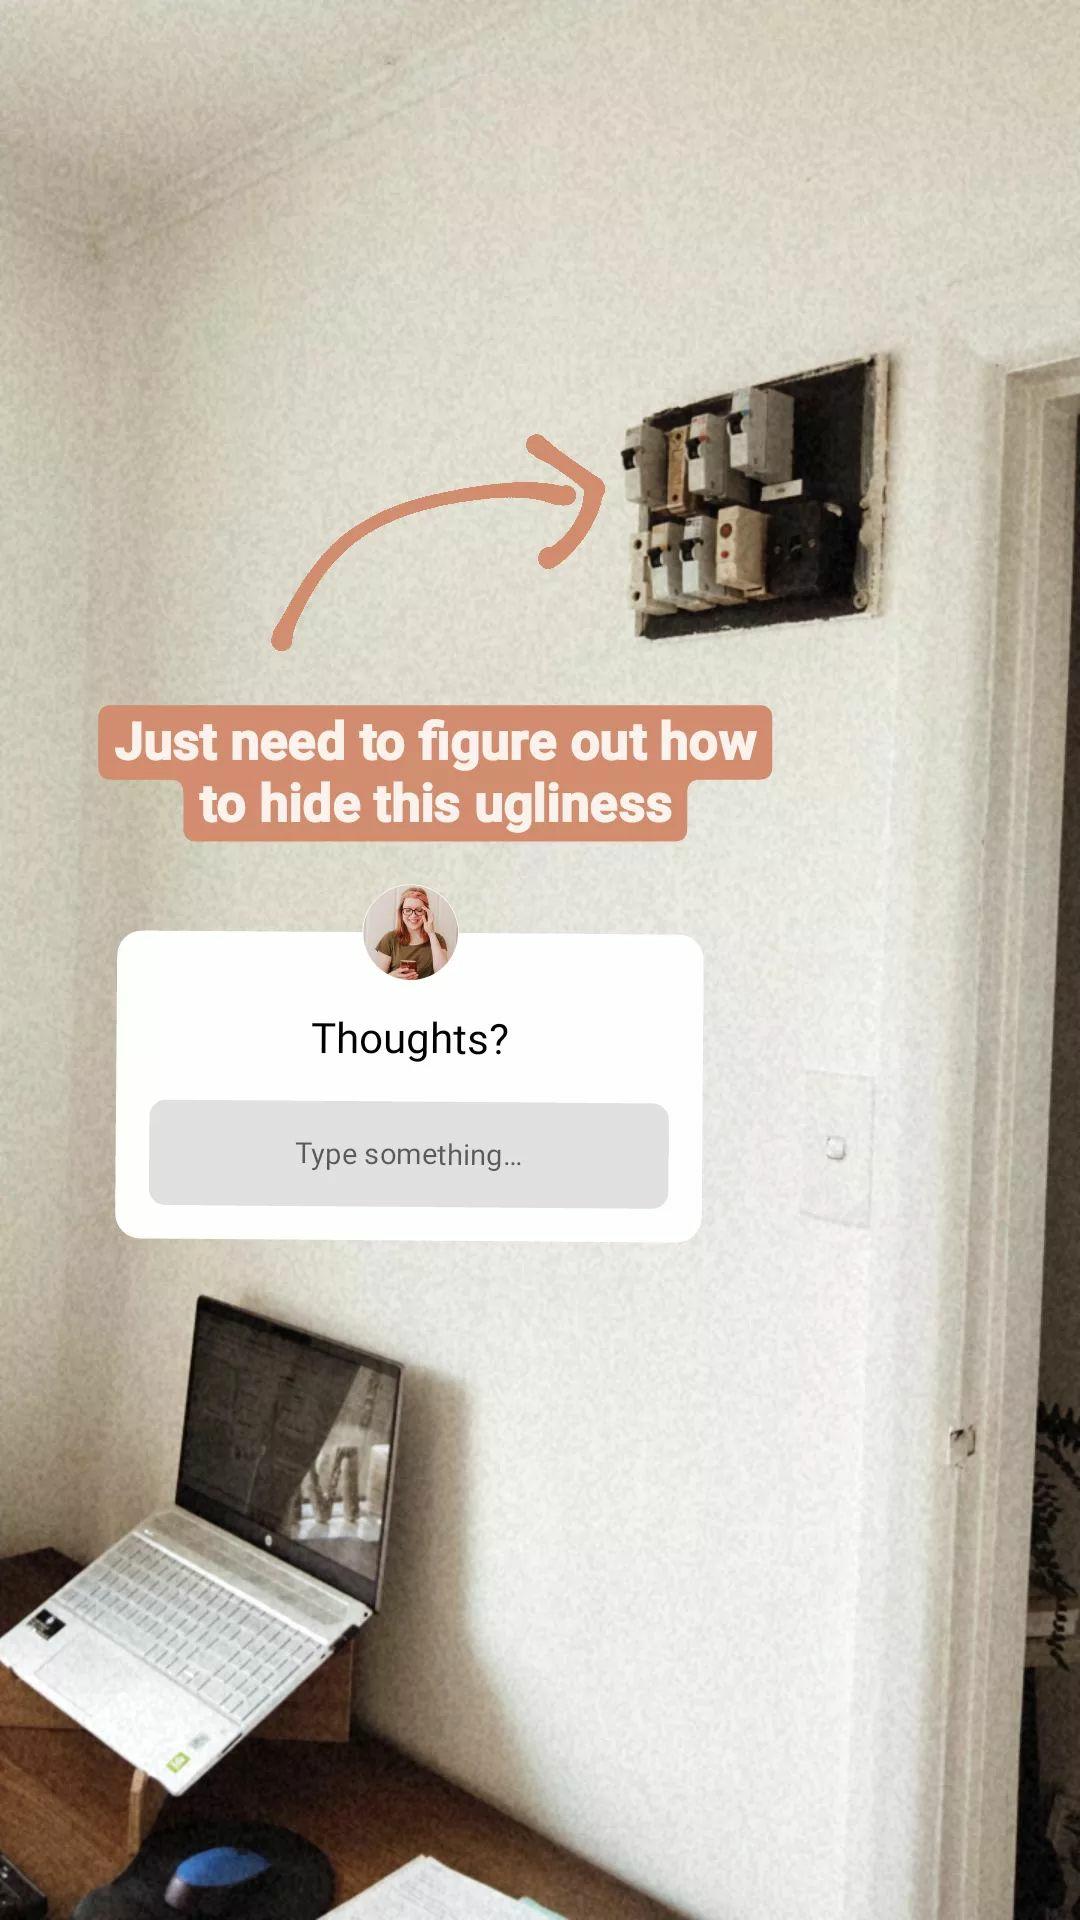 Provide a clear call to action to make your Instagram stories more engaging.